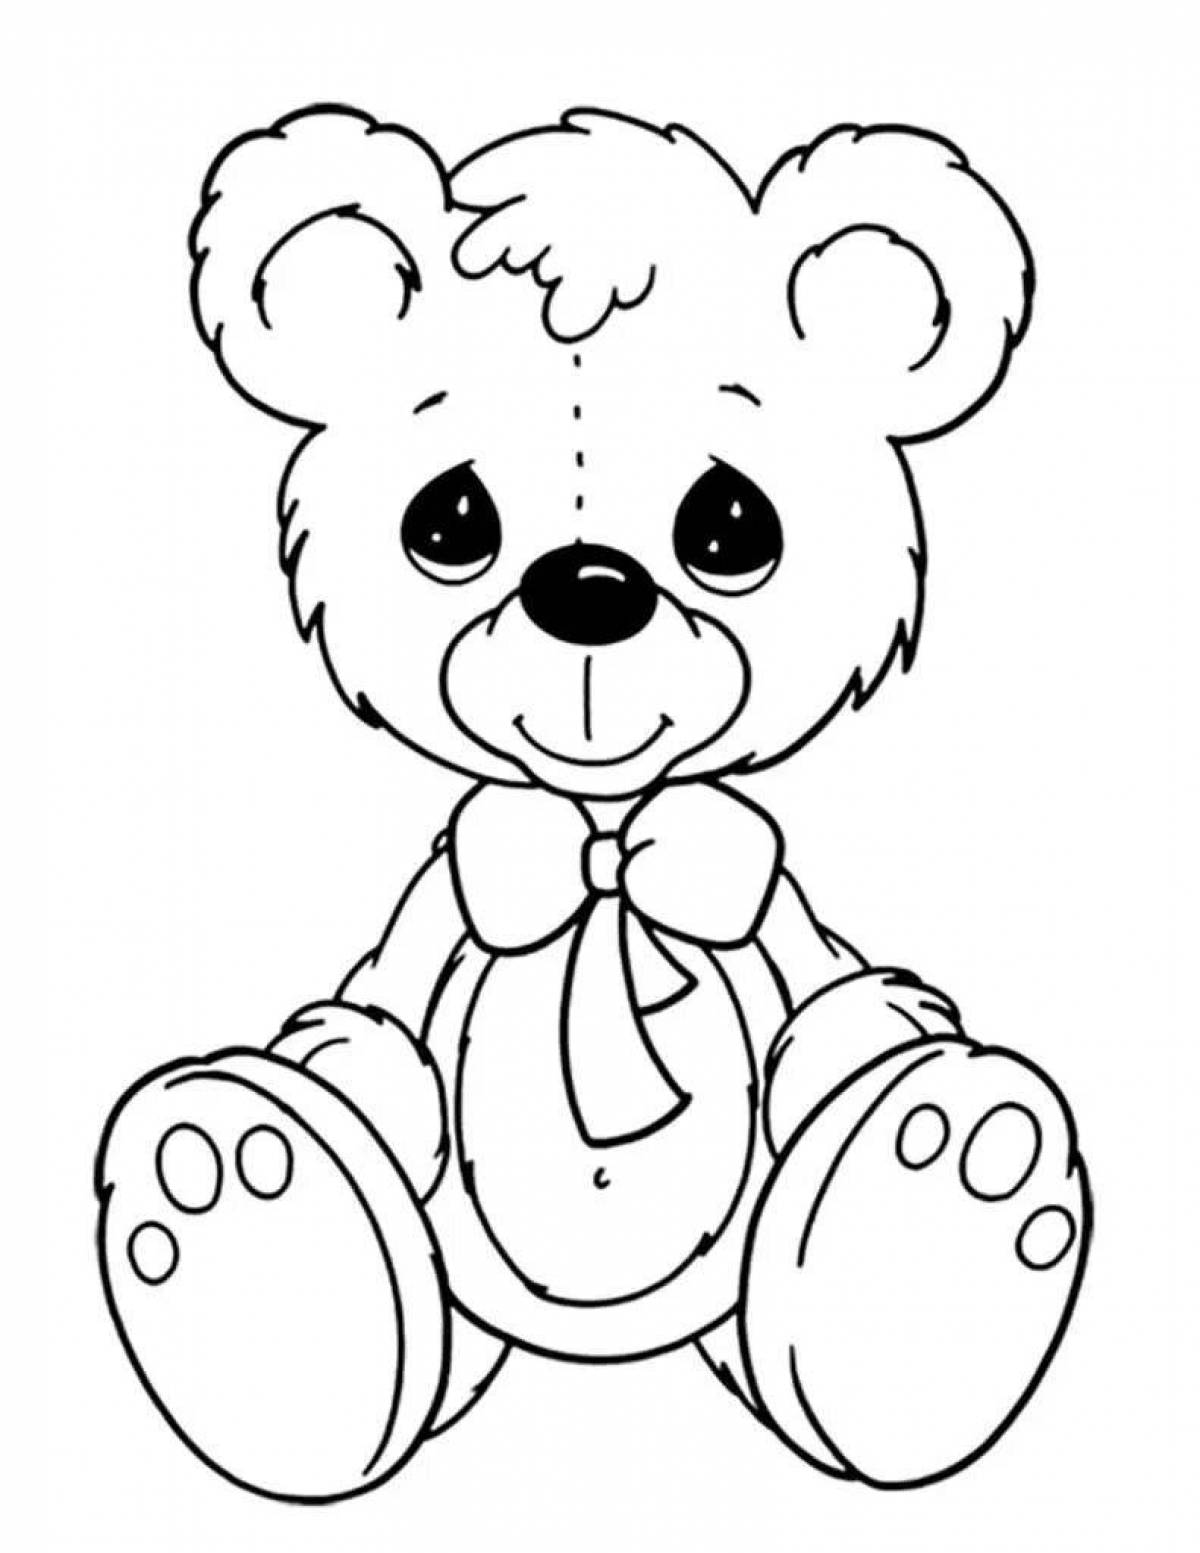 Glowing teddy bear coloring book for kids